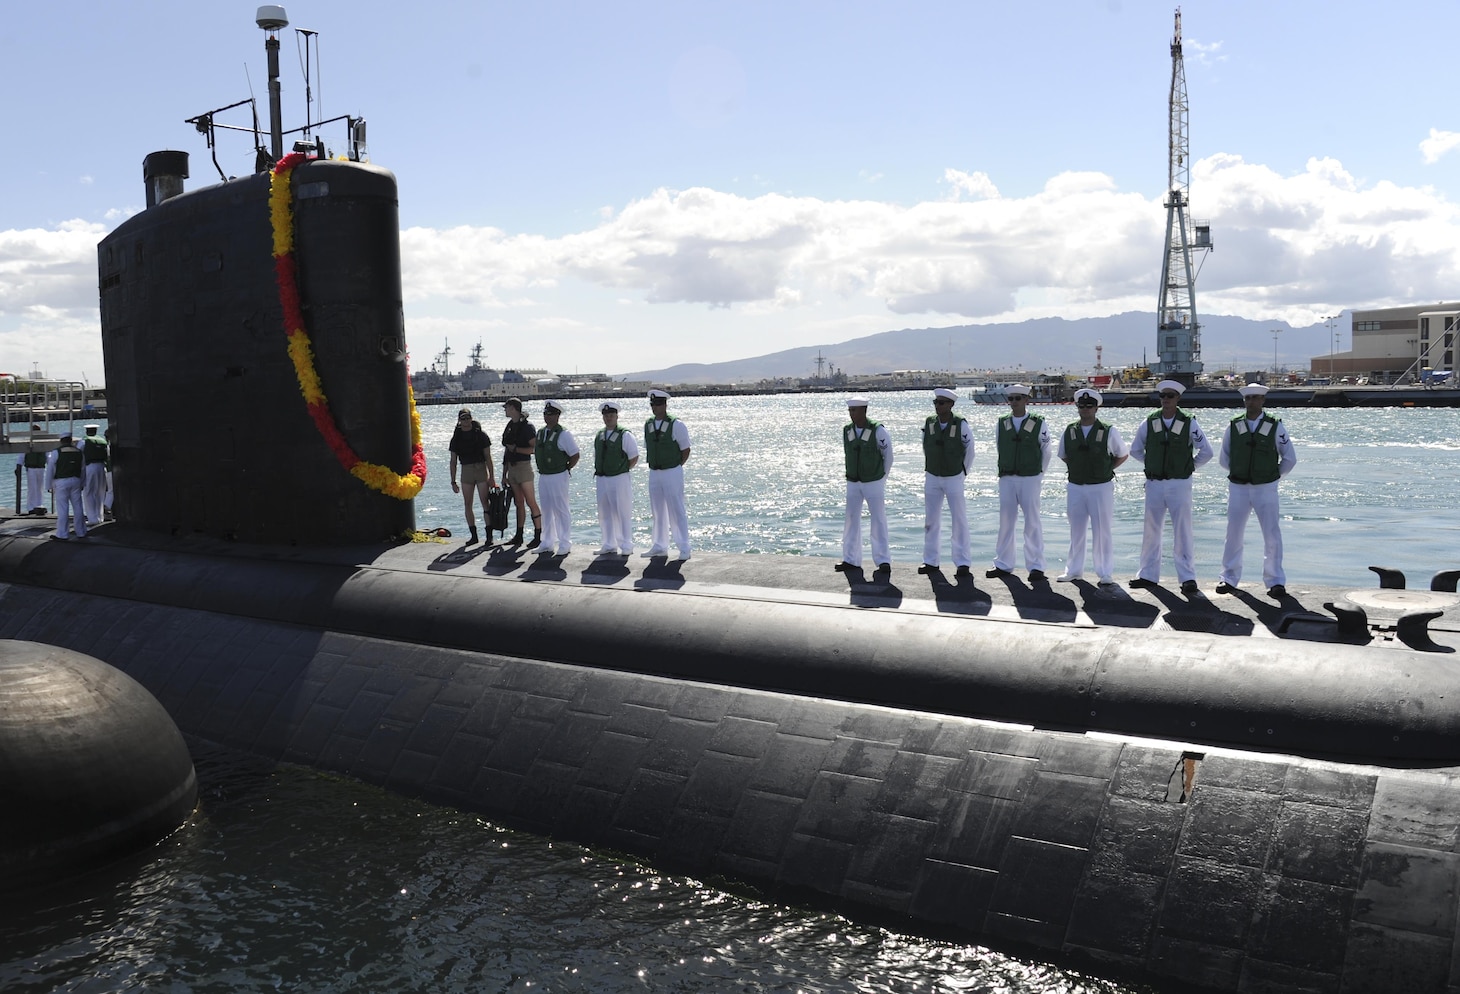 U.S. Sailors stand topside aboard the Los Angeles-class fast-attack submarine USS Tucson (SSN 770) as the ship moors in Pearl Harbor, Hawaii, after the successful completion of a regularly scheduled Western Pacific deployment May 24, 2016. (U.S. Navy photo by Mass Communication Specialist 2nd Class Shaun Griffin)